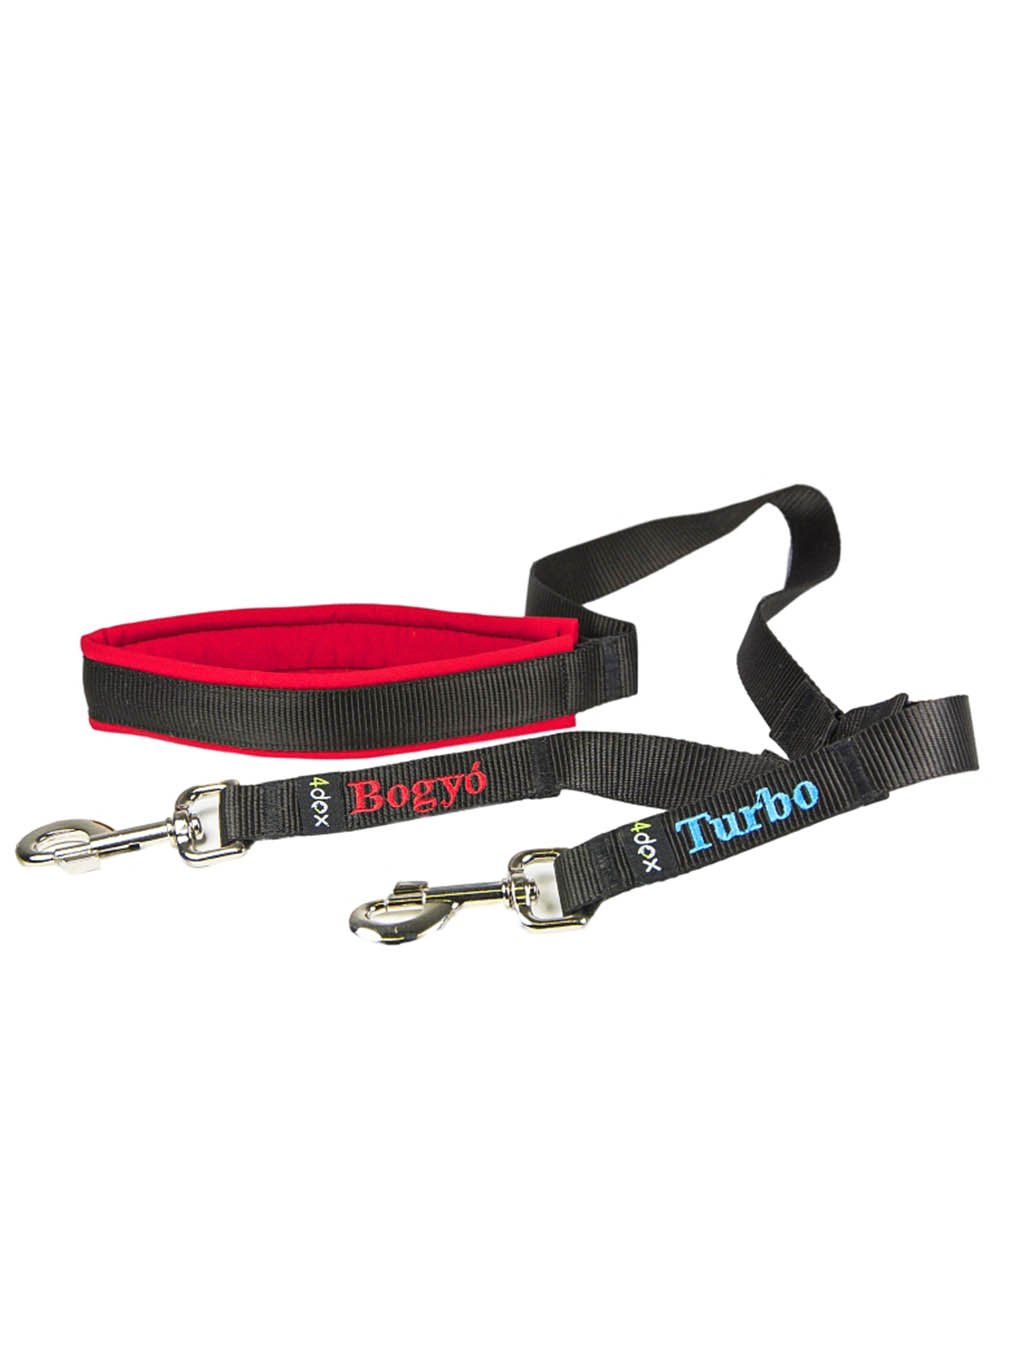 Leash for two dogs - customized leash